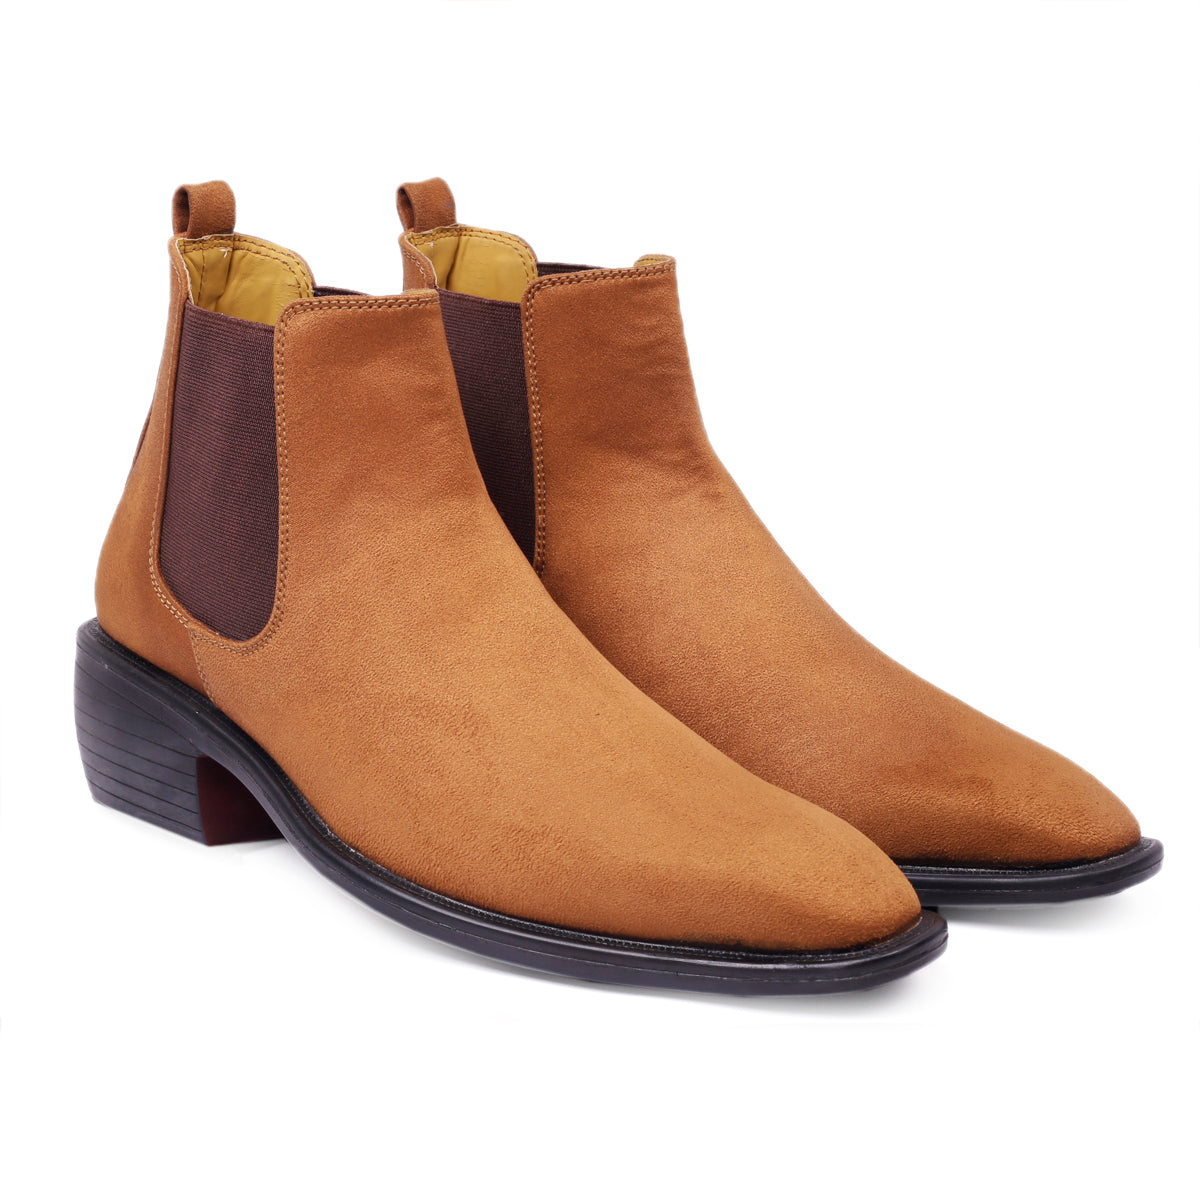 Men's Stylish Suede British Formal and Casual Wear Chelsea Boots - ALL SEASONS